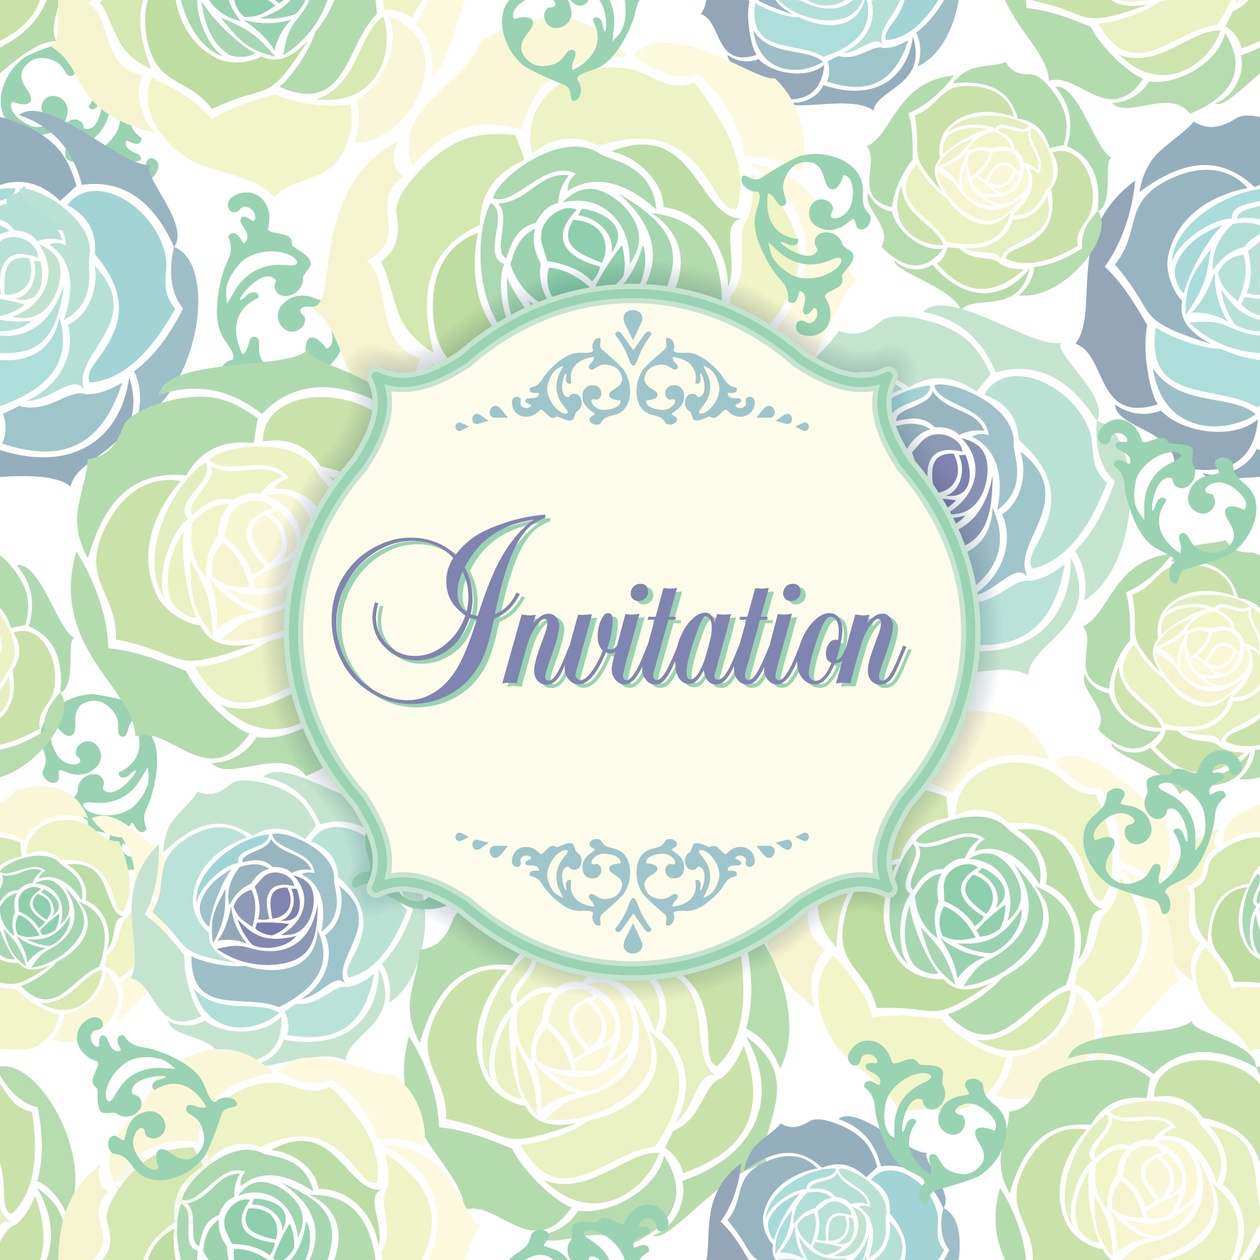 Invitation template with floral background Photoshop brush